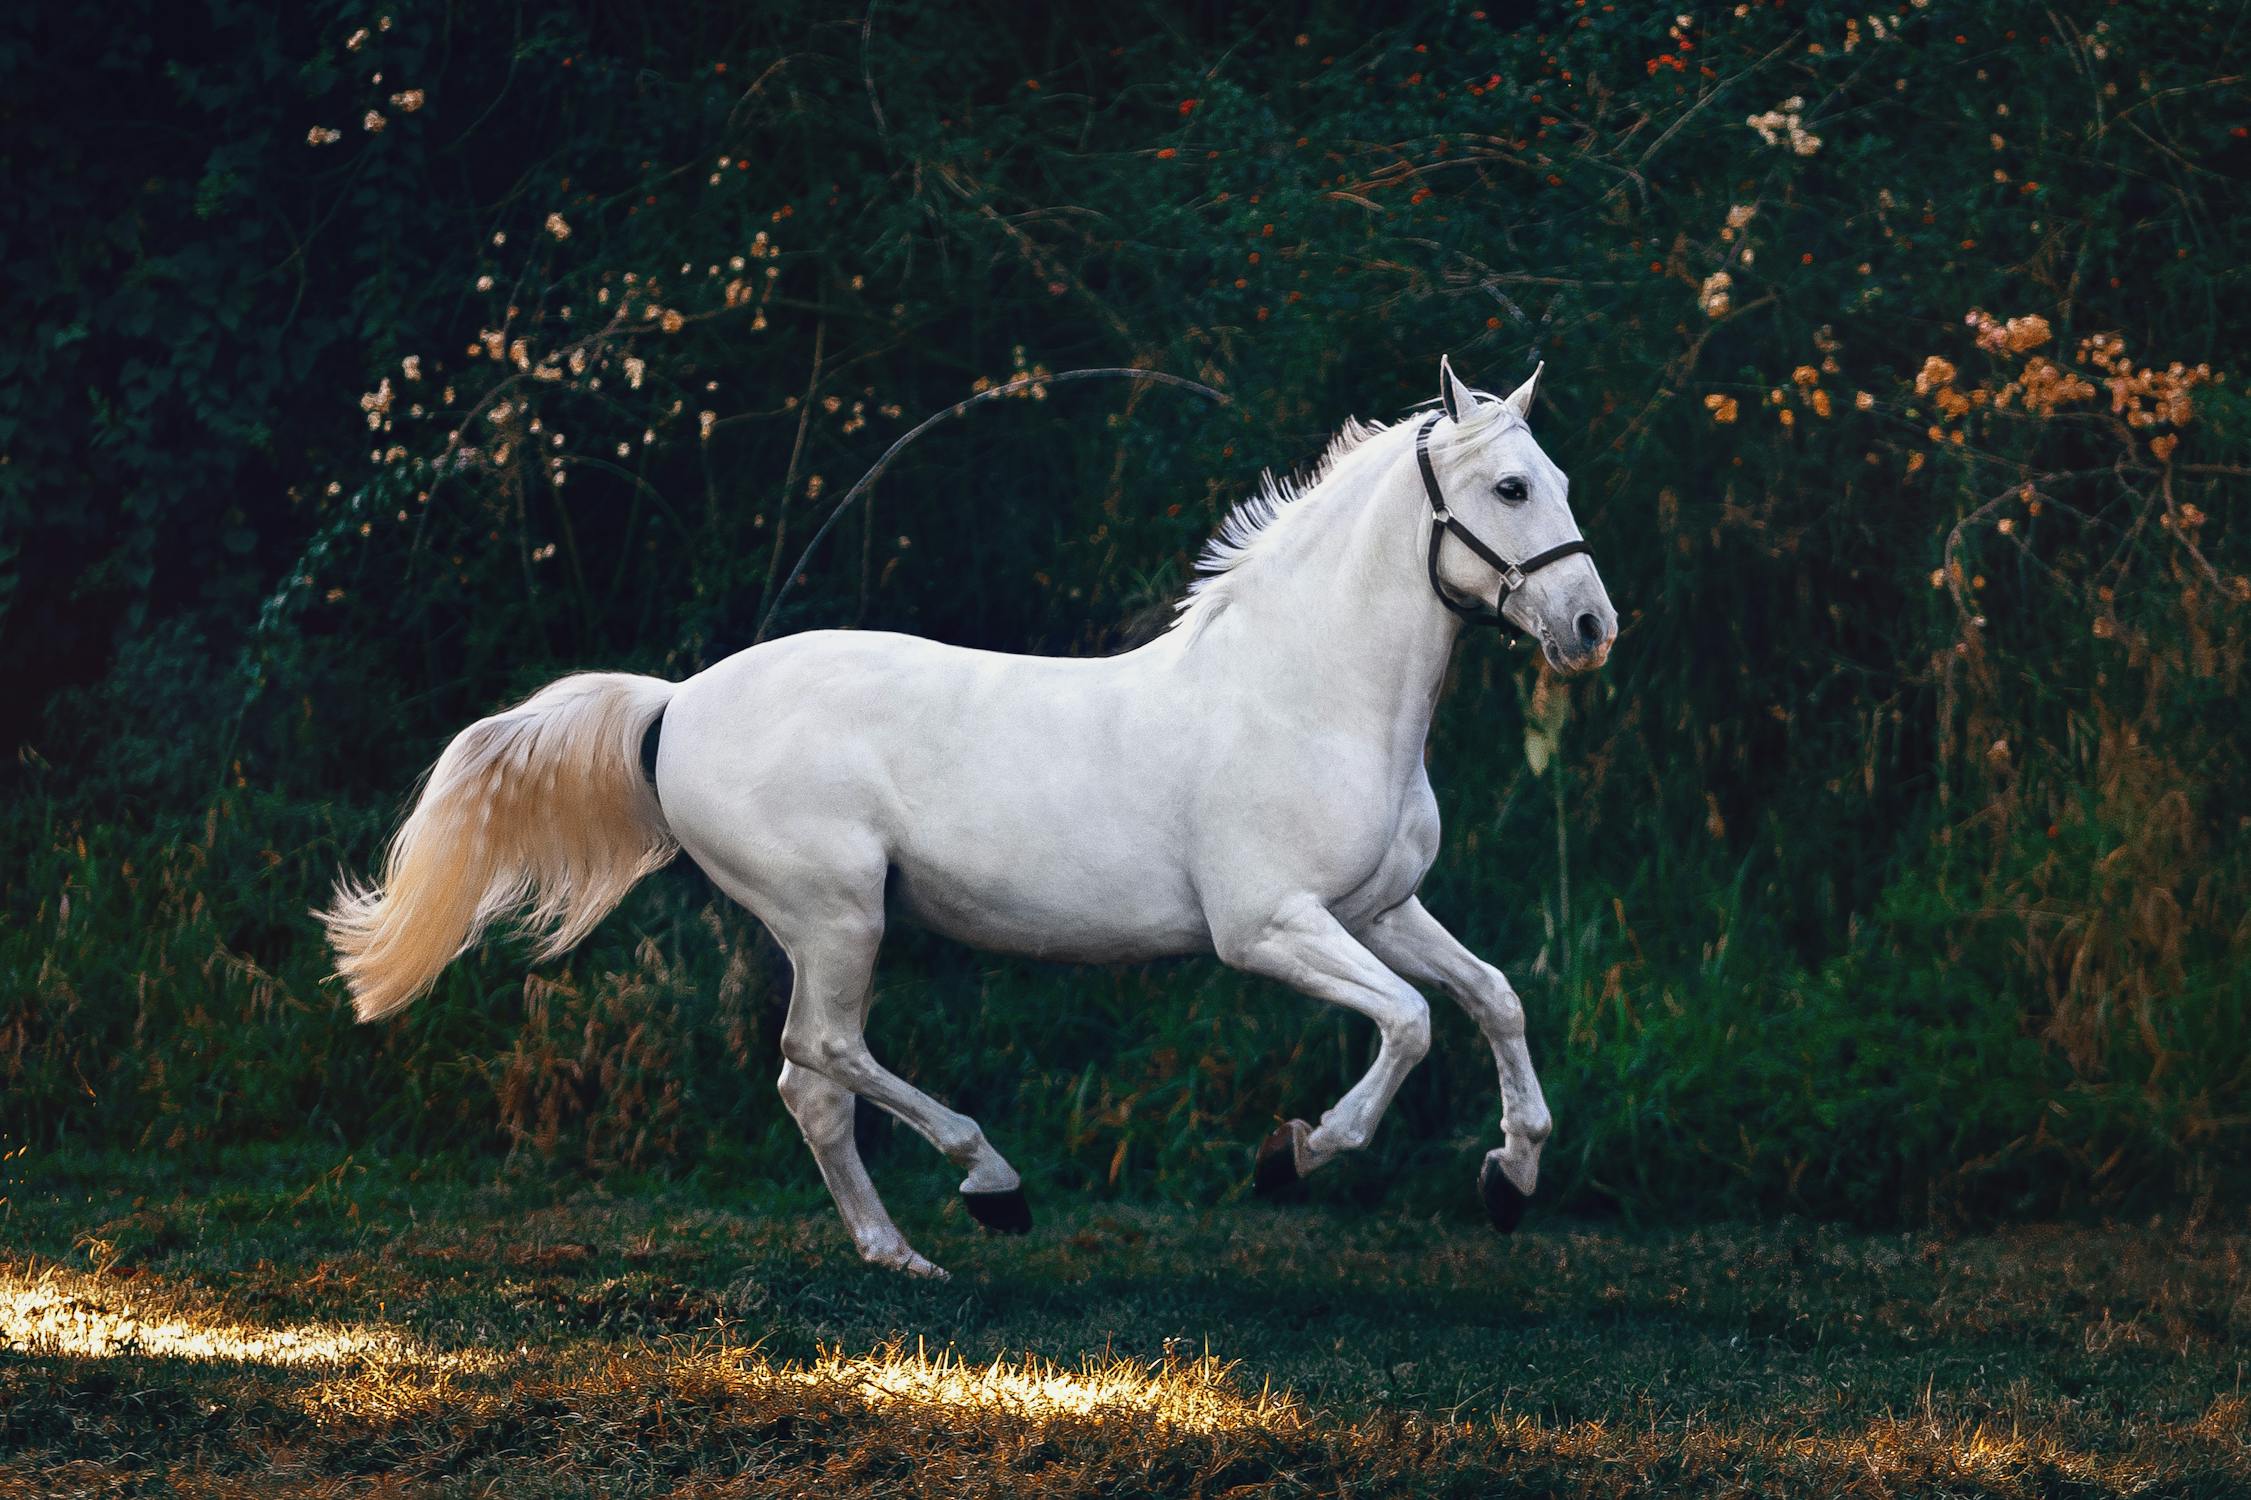 Horse Photo by Helena Lopes from Pexels: https://www.pexels.com/photo/white-horse-on-green-grass-1996333/